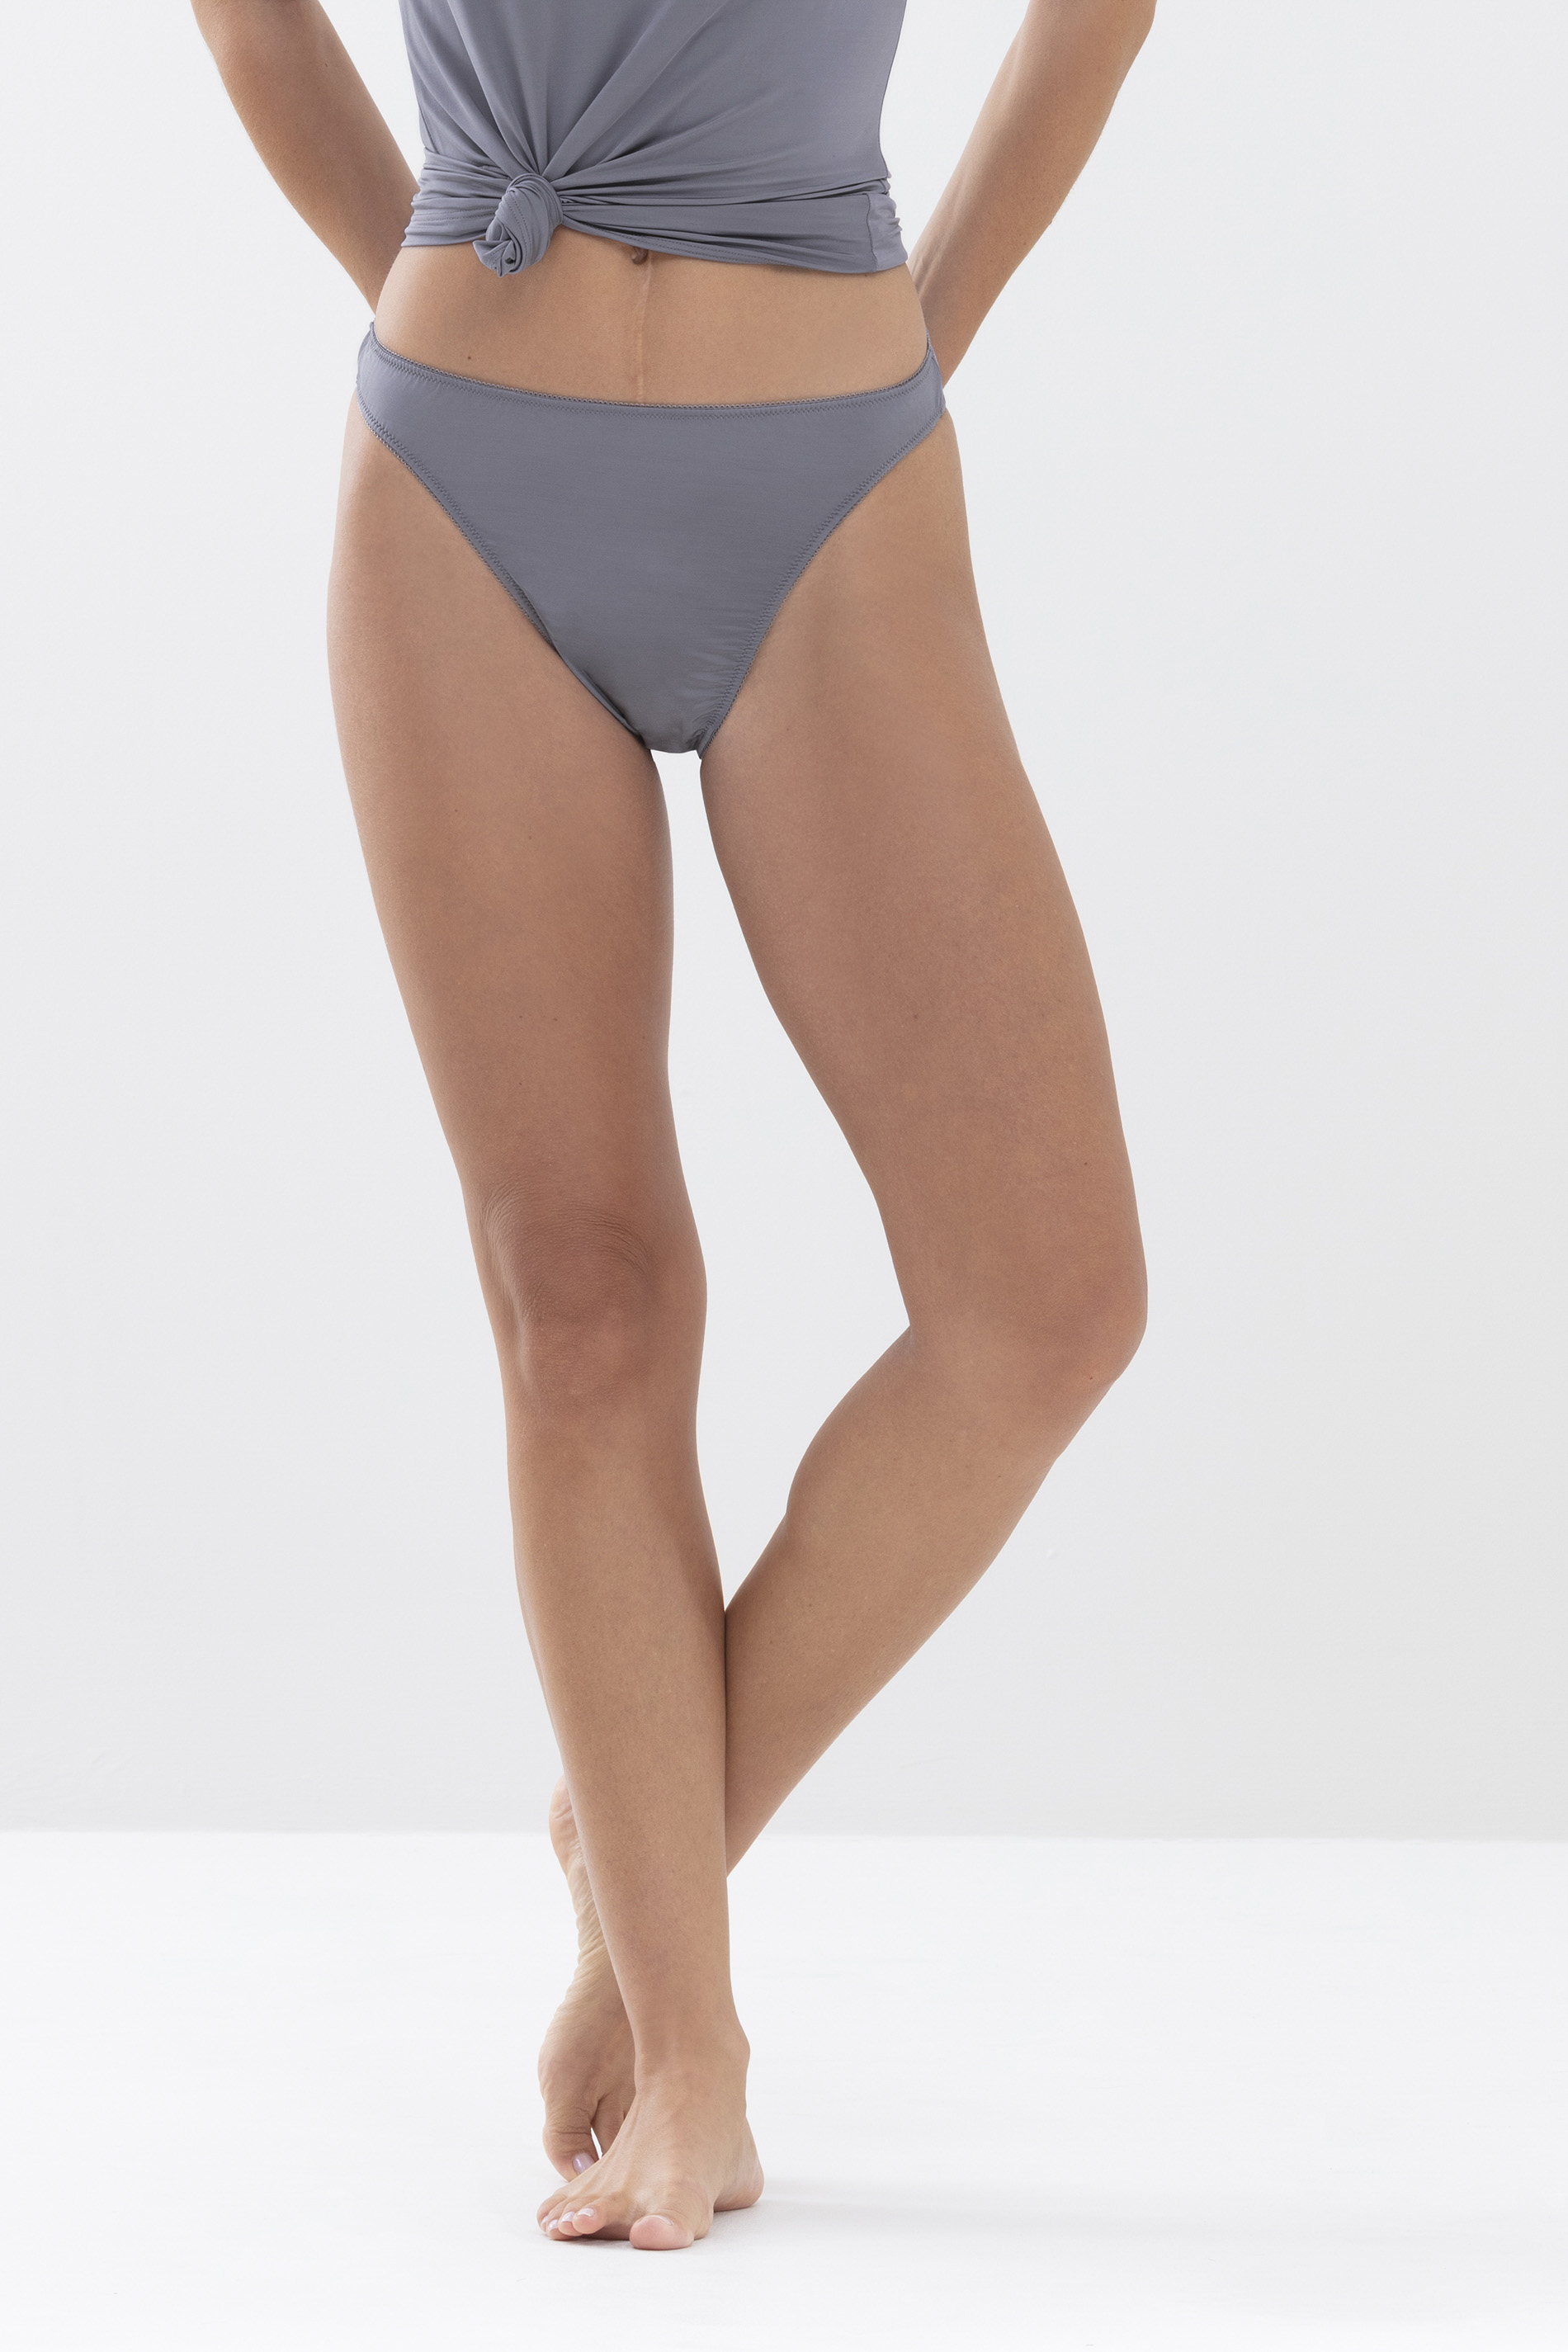 Retro jazz briefs Lovely Grey Serie Poetry Classy Front View | mey®